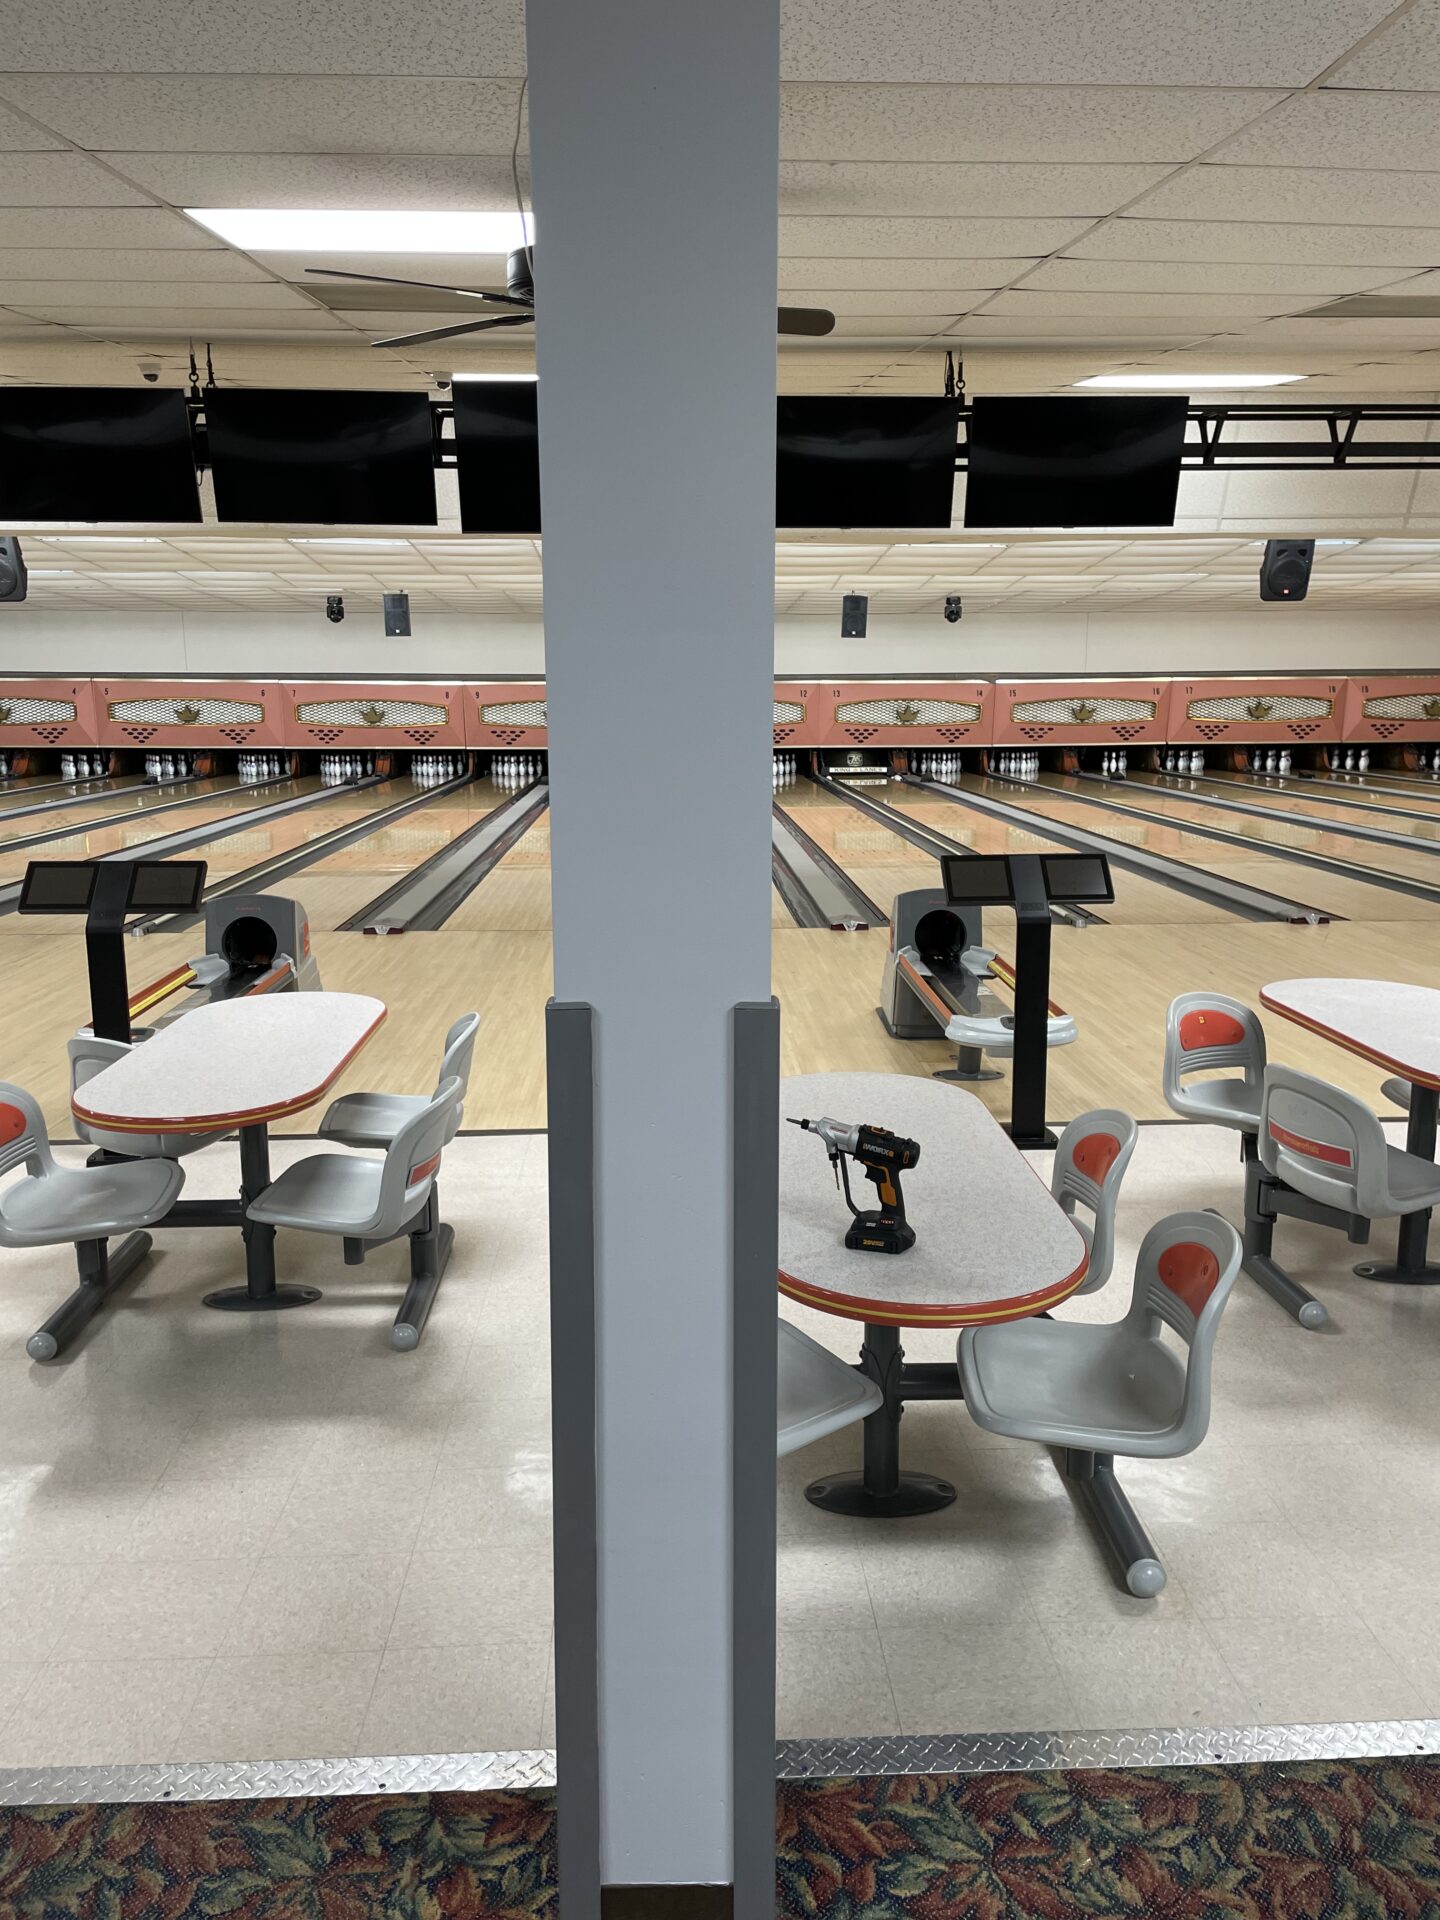 Let’s Strike a Deal: Book a Memorable Holiday Party at a Bowling Center